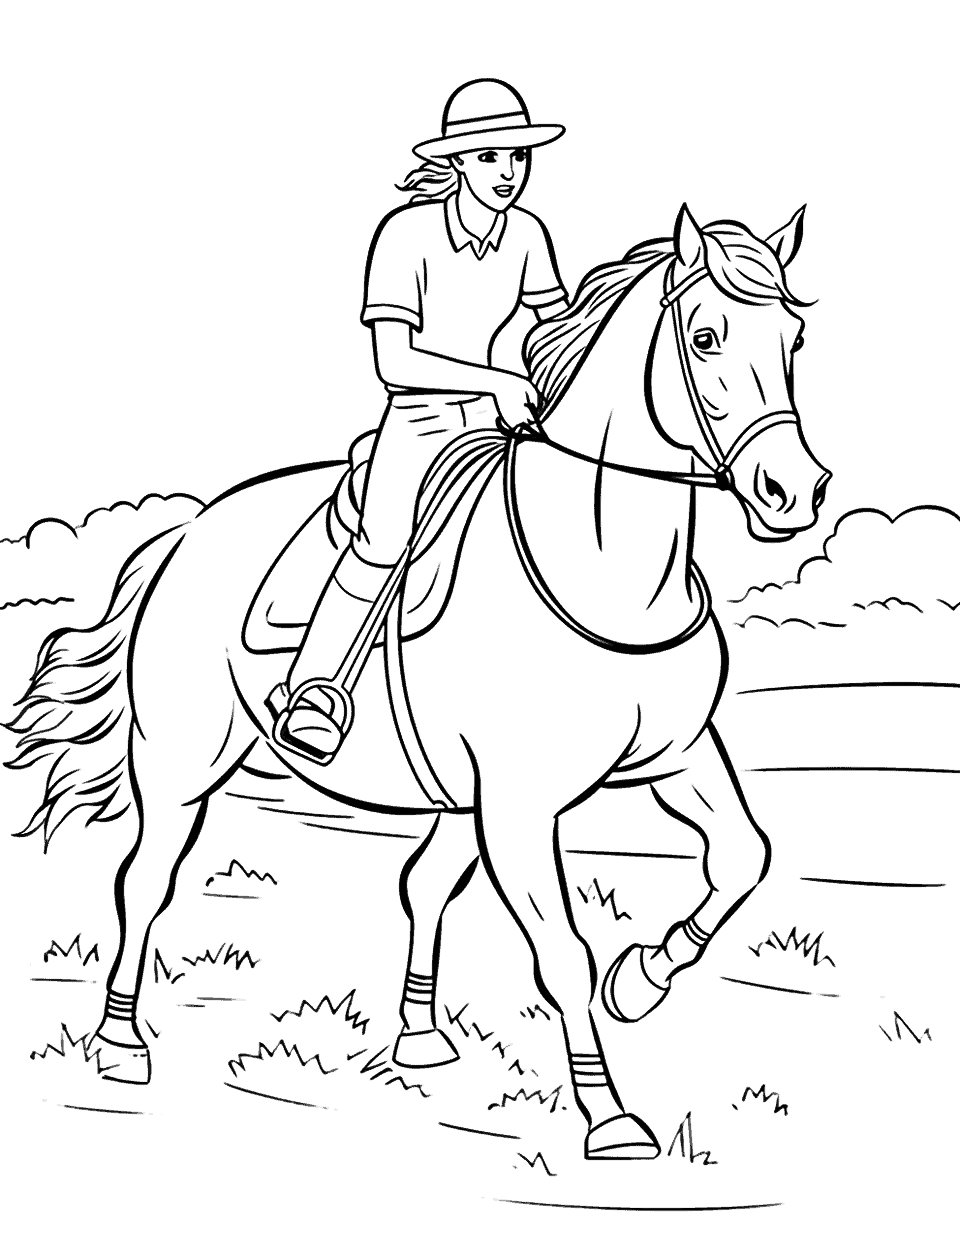 Barrel Racing Action Horse Coloring Page - An exciting scene from a barrel racing competition with a rider skillfully guiding her horse.